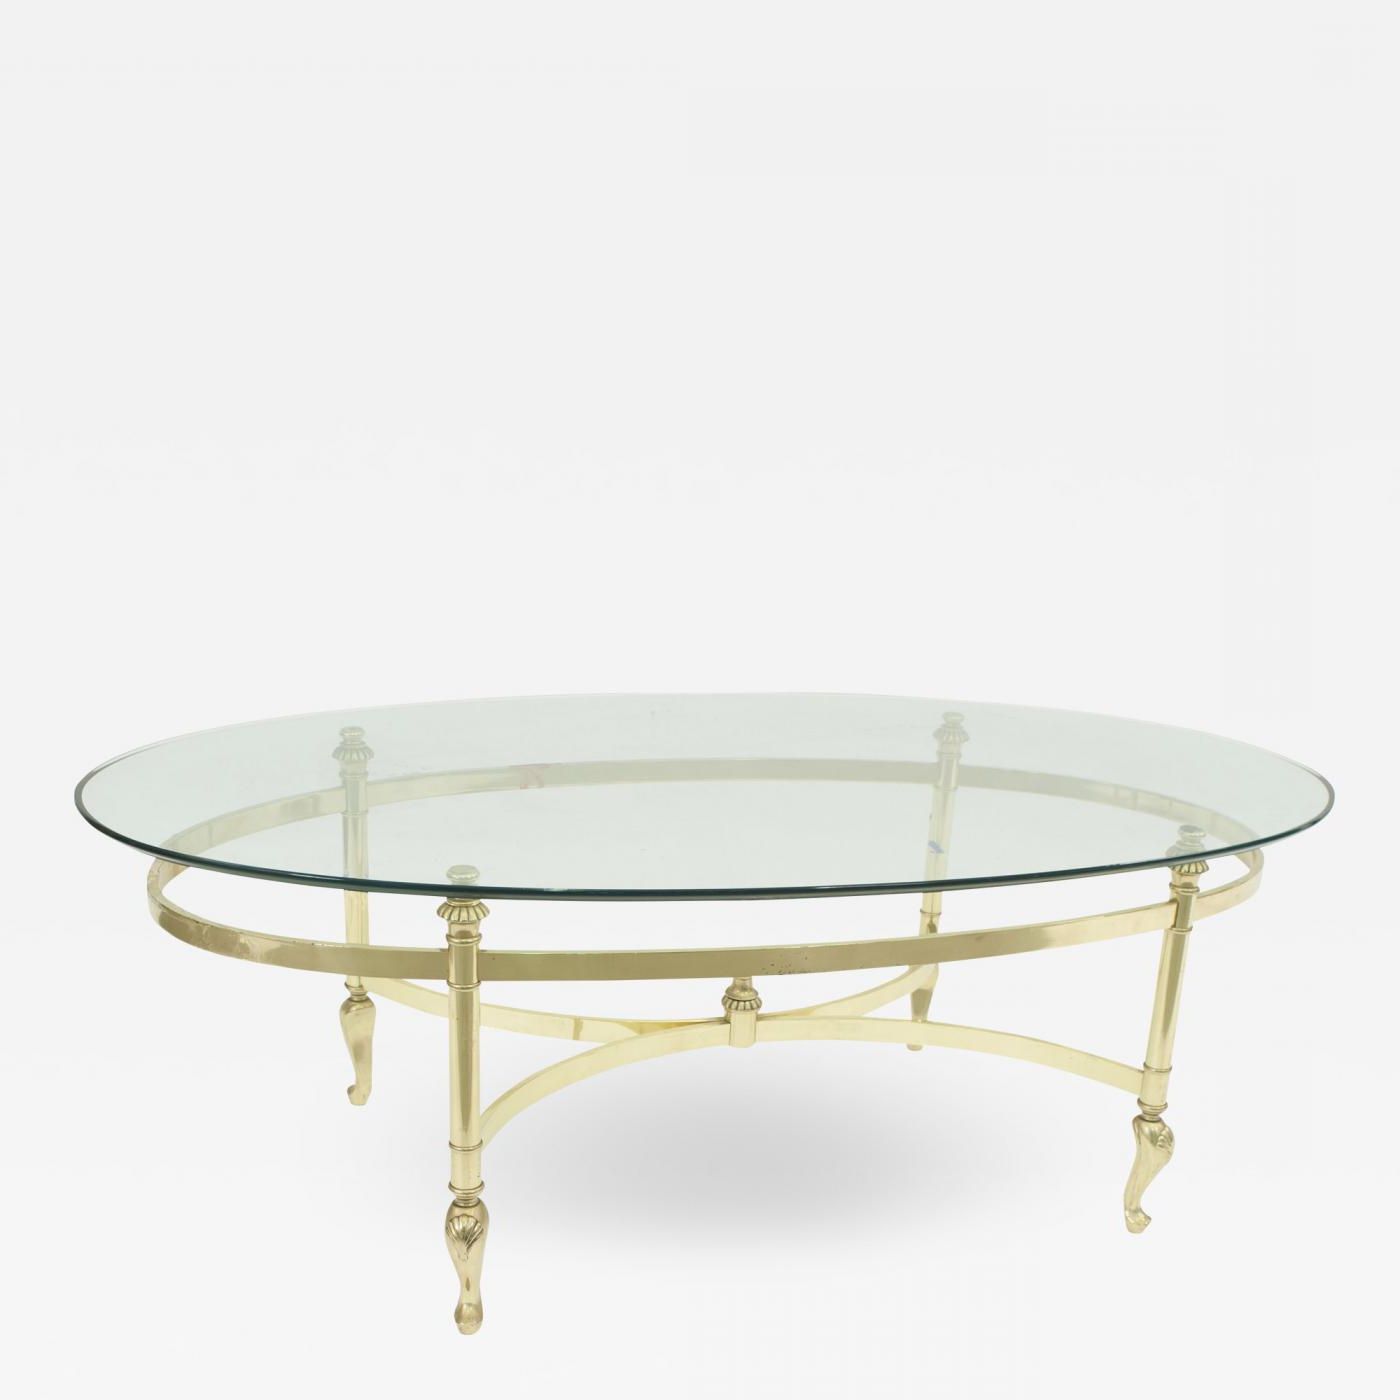 Contemporary Oval Brass And Glass Coffee Table Intended For Famous Glass And Gold Oval Coffee Tables (Gallery 15 of 20)